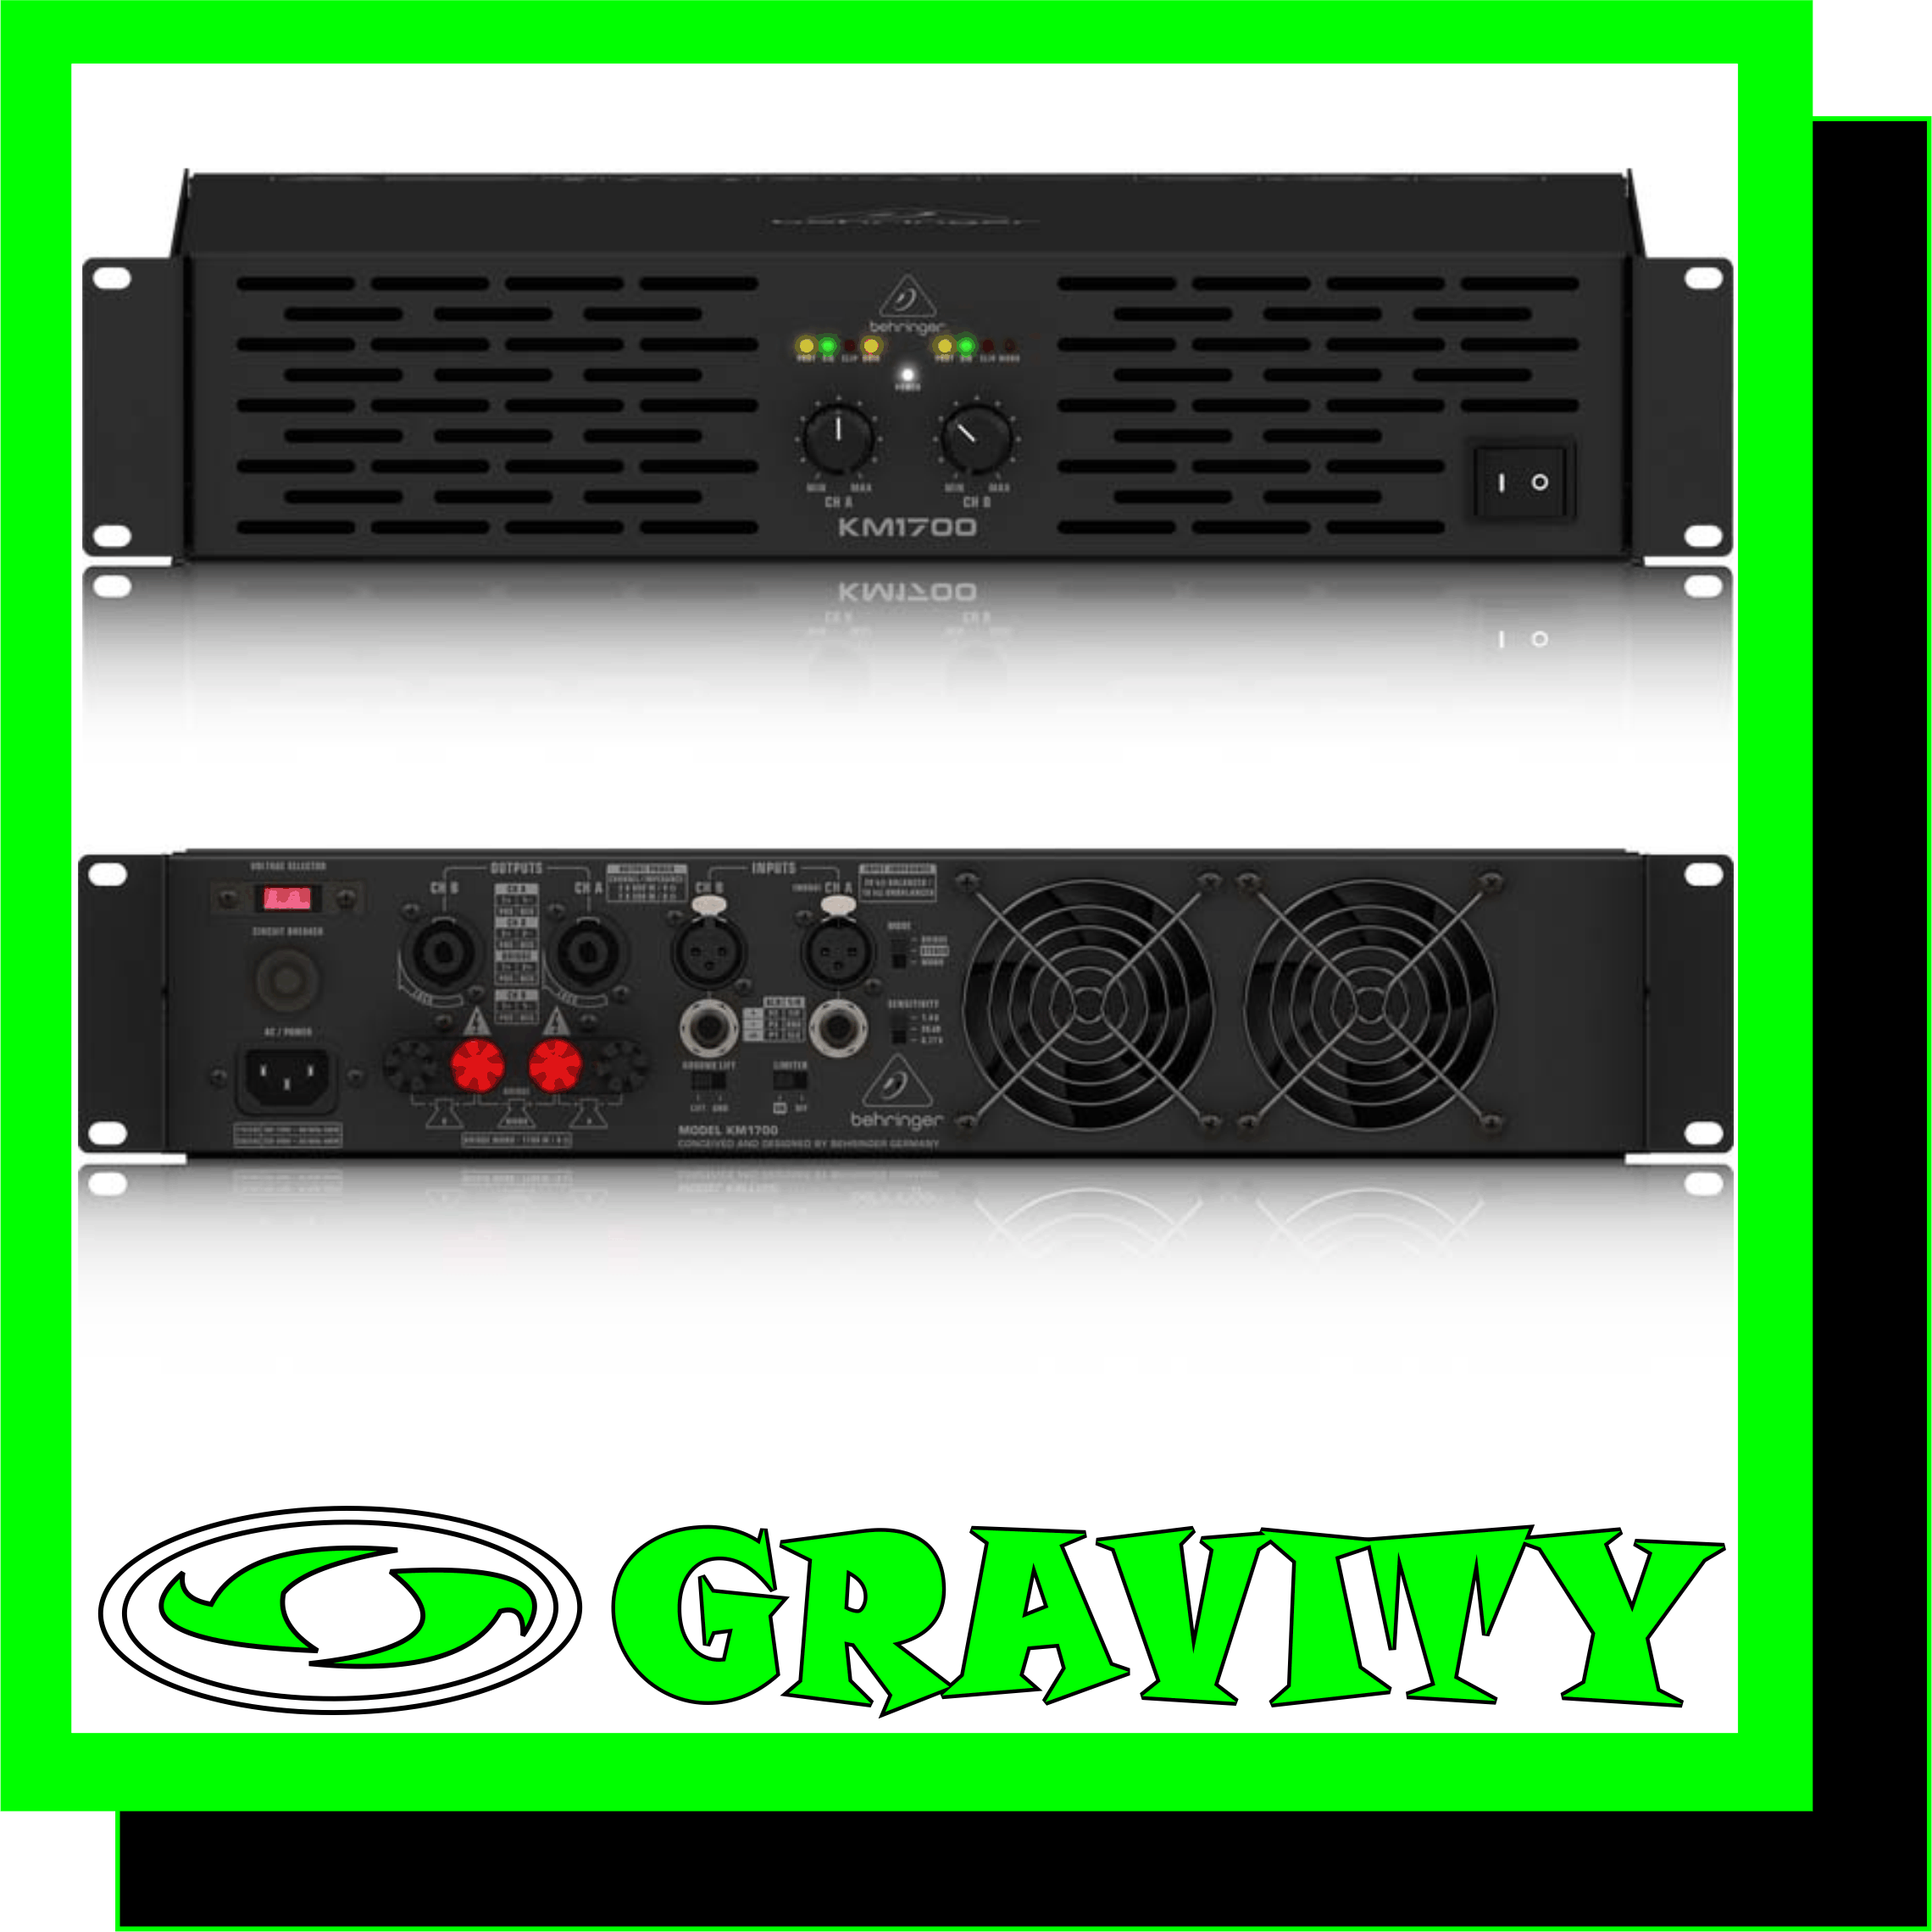 KM1700 Professional 1700-Watt Stereo Power Amplifier with ATR (Accelerated Transient Response)  -2 x 800 Watts into 4 Ohms; 2 x 500 Watts into 8 Ohms; 1700 Watts into 8 Ohms (bridge mode) -ATR (Accelerated Transient Response) technology for ultimate punch and clarity -Switchable limiters offer maximum output level with reliable overload protection -Precise power, signal and clip LEDs to monitor performance -XLR and 1/4? TRS input connectors for compatibility with any source -Professional speaker connectors and “touch-proof” binding posts support most speaker wiring systems -Independent DC and short circuit protection on each channel automatically protects amplifier and speakers -High-current toroidal transformer for ultra-high transient response and absolute reliability -“Front to back” ventilation for reliable operation -“Built-like-a-tank” impact-resistant, all-steel 2U rackmount chassis  KM1700 The remarkable KM1700 packs a heart-stopping 1700 Watts of output power into a lightweight (27.5 lbs/12.5 kg) package, thanks to our Accelerated Transient Response (ATR) technology. Ample power (1700 Watts in Bridge mode; 2 x 800 Watts @ 4 Ohms; 2 x 500 Watts @ 8 Ohms) and high-tech efficiency combine, giving you a supercharged workhorse that will keep your rig kicking for years and years to come.   Accelerated Transient Response Delivers the Knockout Punch It takes huge pulses of energy (current and voltage) to propel a woofer cone out fast enough to match a bass beat. That’s called Transient Response and it’s the holy grail of amp design. By carefully selecting transistors with extremely high slew rates and optimizing other proprietary parts of our circuitry, our amps are able to react instantly to even the most demanding electronic bass impulses. If the woofers in your PA system can keep up, your audience will hear a tighter, crisper, more natural sound.  Instead of operating relatively continuously like most power amps, the KM1700 features rail tracking for effectively modulating the power supply rails with only the peaks of the input signal. This technology has revolutionized pro audio amp designs with its outstanding performance and efficiency.  Sublimely Simple Operation The front panel controls and indicators provide your system’s vital signs at a glance. After pressing the Power button, the Power LED lights to show the amp is ready for action. All channels feature positive-detent Gain controls with Signal LEDs that light when a signal is present, as well as Clip LEDs that alert to reduce the input signal.  Just as elegant as the front, the rear panel is home to the balanced XLR and ¼ ” TRS, plus unbalanced ¼ ” TS connections. Take your pick of professional locking speaker Outputs or touch-proof binding posts to securely connect speakers. The same panel contains the switches that put the KM1700 in Mono, Stereo (two channel mode) or mono Bridge mode. Flick the Limiter On/Off switch to activate the built-in overload protection.   Sound Value The remarkable KM1700 power amp was built for the working musician. It is exceptionally light, packs a massive 1700 Watts of output power, thanks to our Accelerated Transient Response (ATR) technology and is built rugged enough for life on the road. Plus, the KM1700’s ultra-light price tag will leave cash left over for you to get more stuff to amplify! Check out the incredible KM1700 at your BEHRINGER dealer.